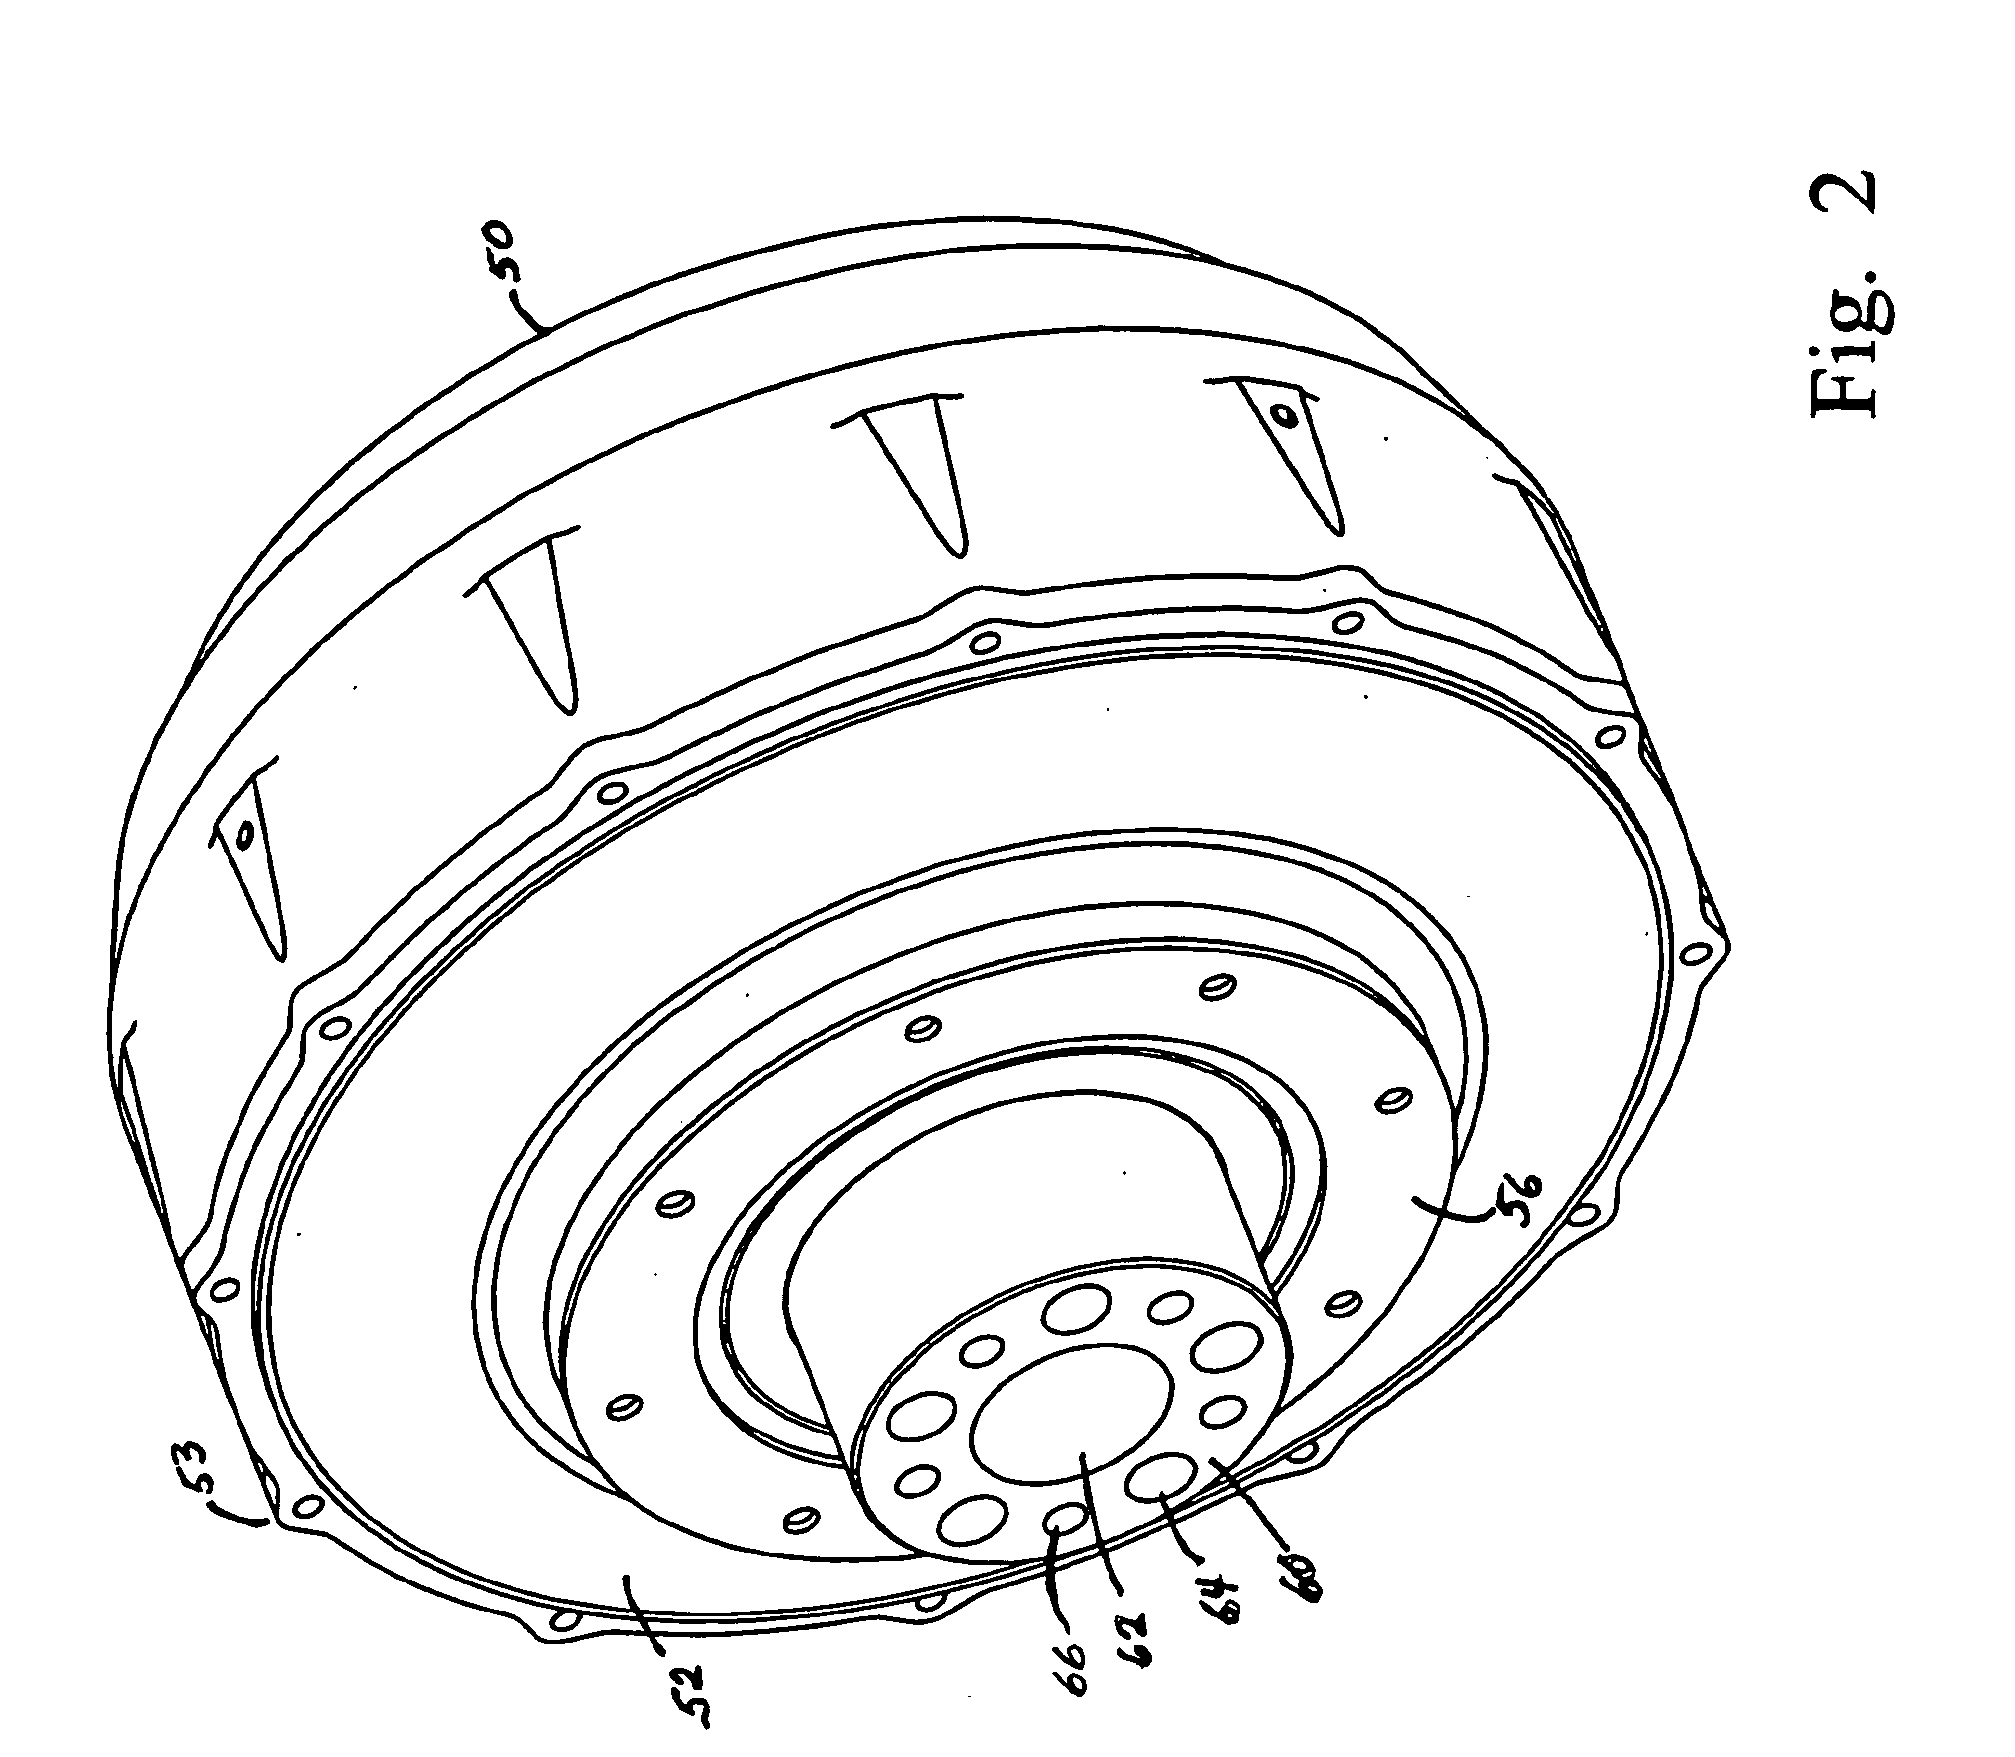 Integrated stator-axle for in-wheel motor of an electric vehicle